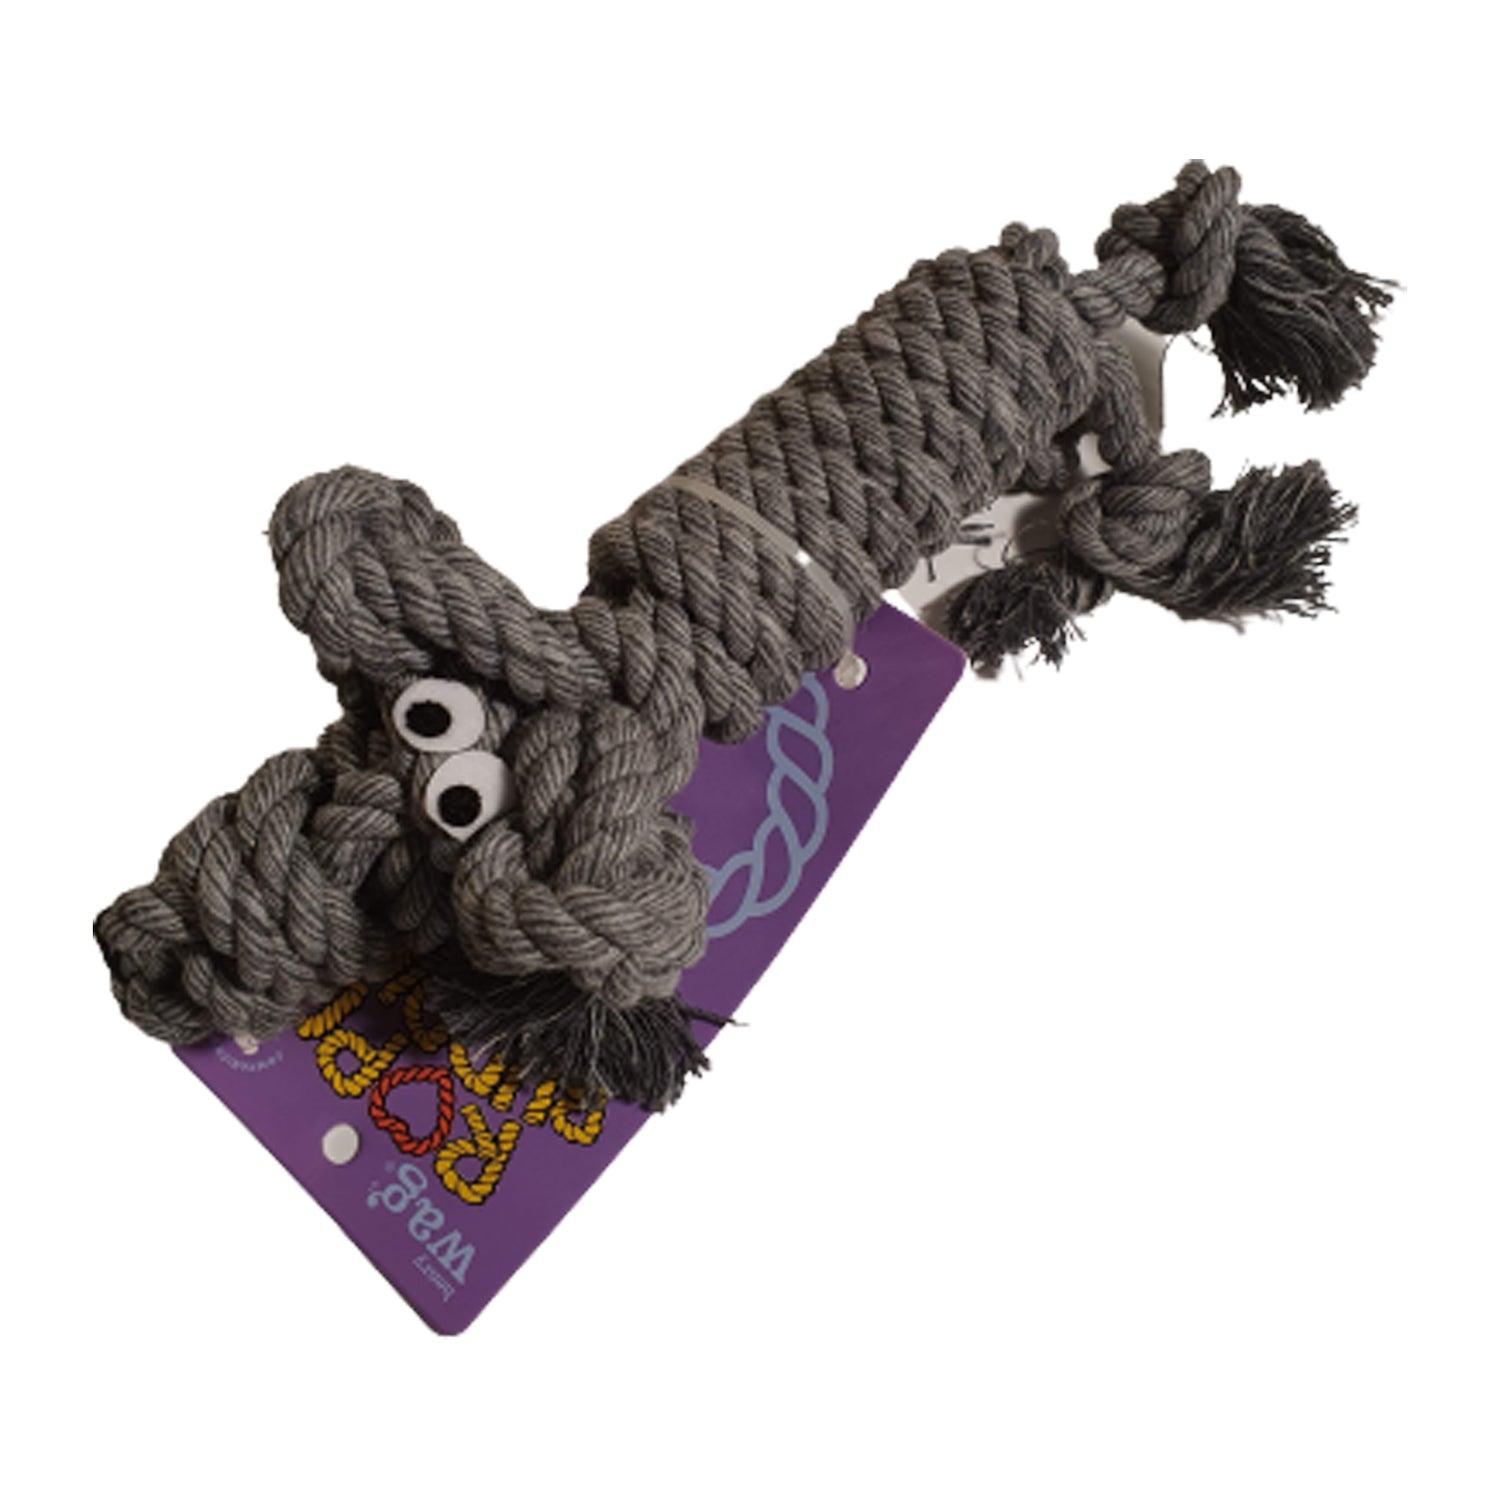 Henry-Wag-Rope-Buddies-Companion-Dog-Toy-Characters